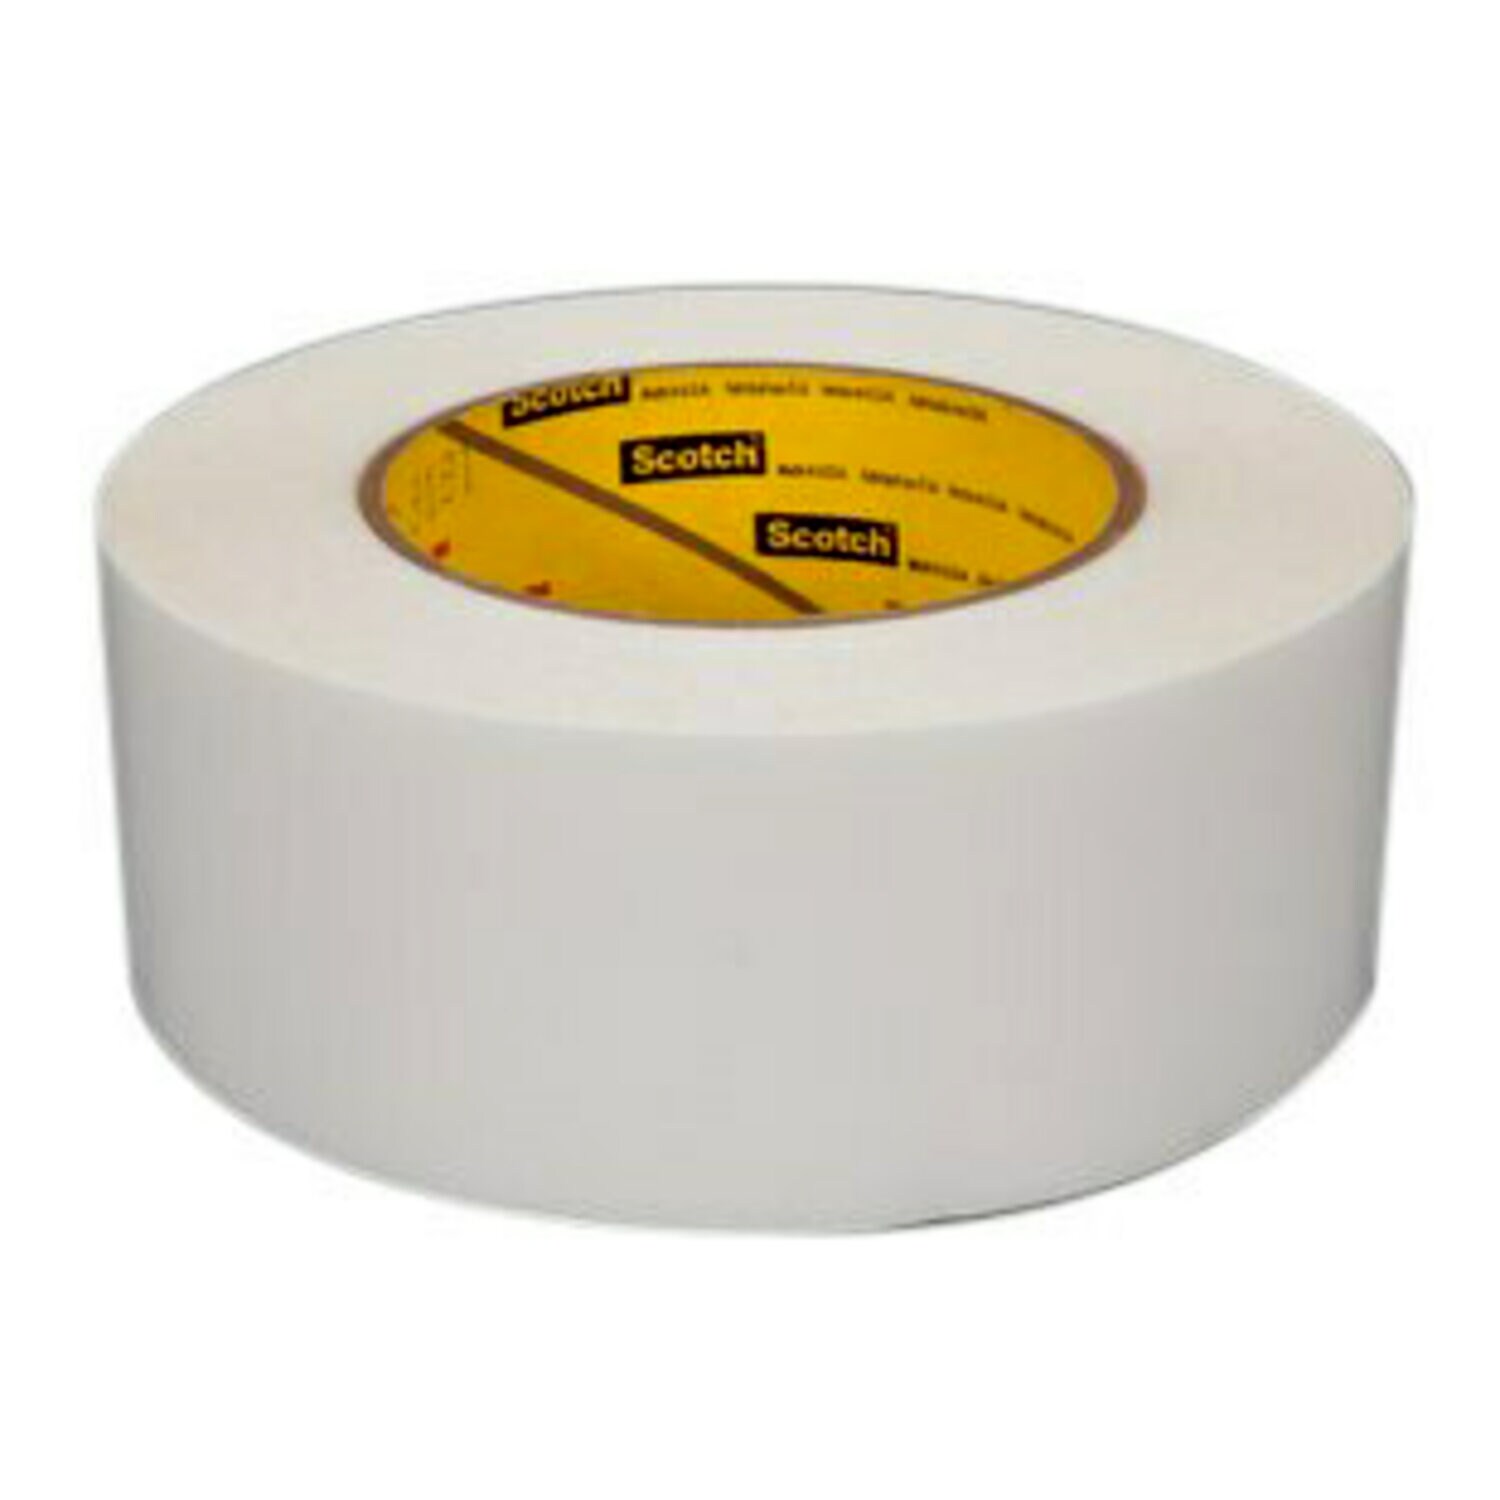 7010295791 - 3M Squeak Reduction Tape 5430, Transparent, 24 in x 36 yd, 7.4 mil, 1
roll per case, Untrimmed and Potted